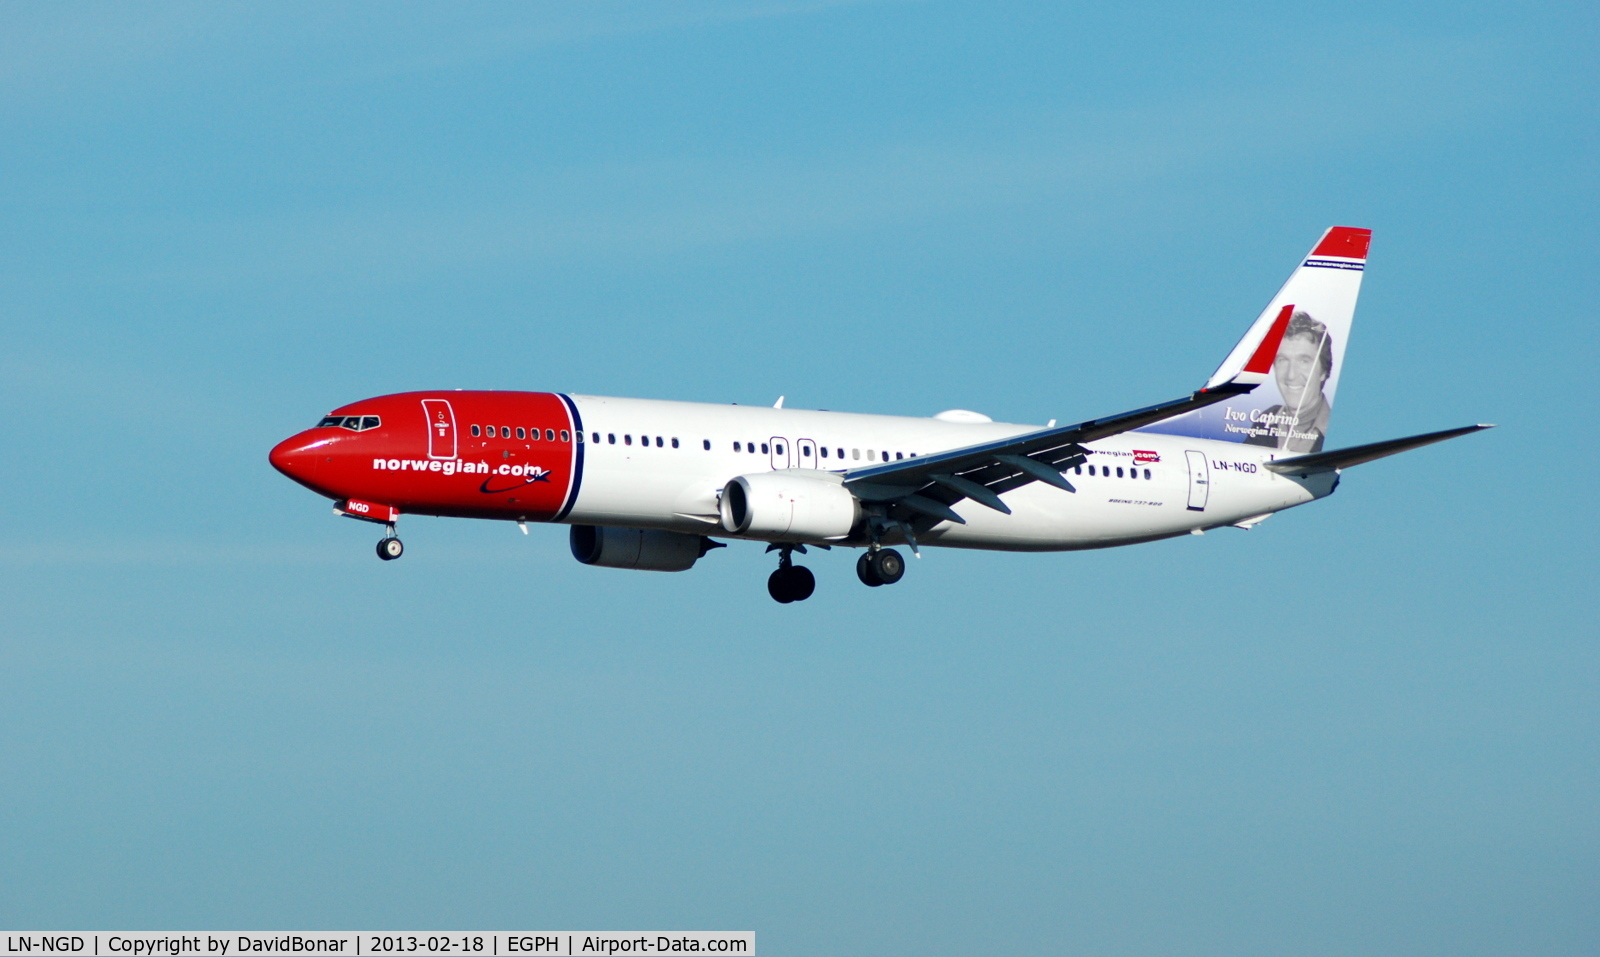 LN-NGD, 2012 Boeing 737-8JP C/N 39049/4161, Arriving from Oslo on a bright Winter morning.